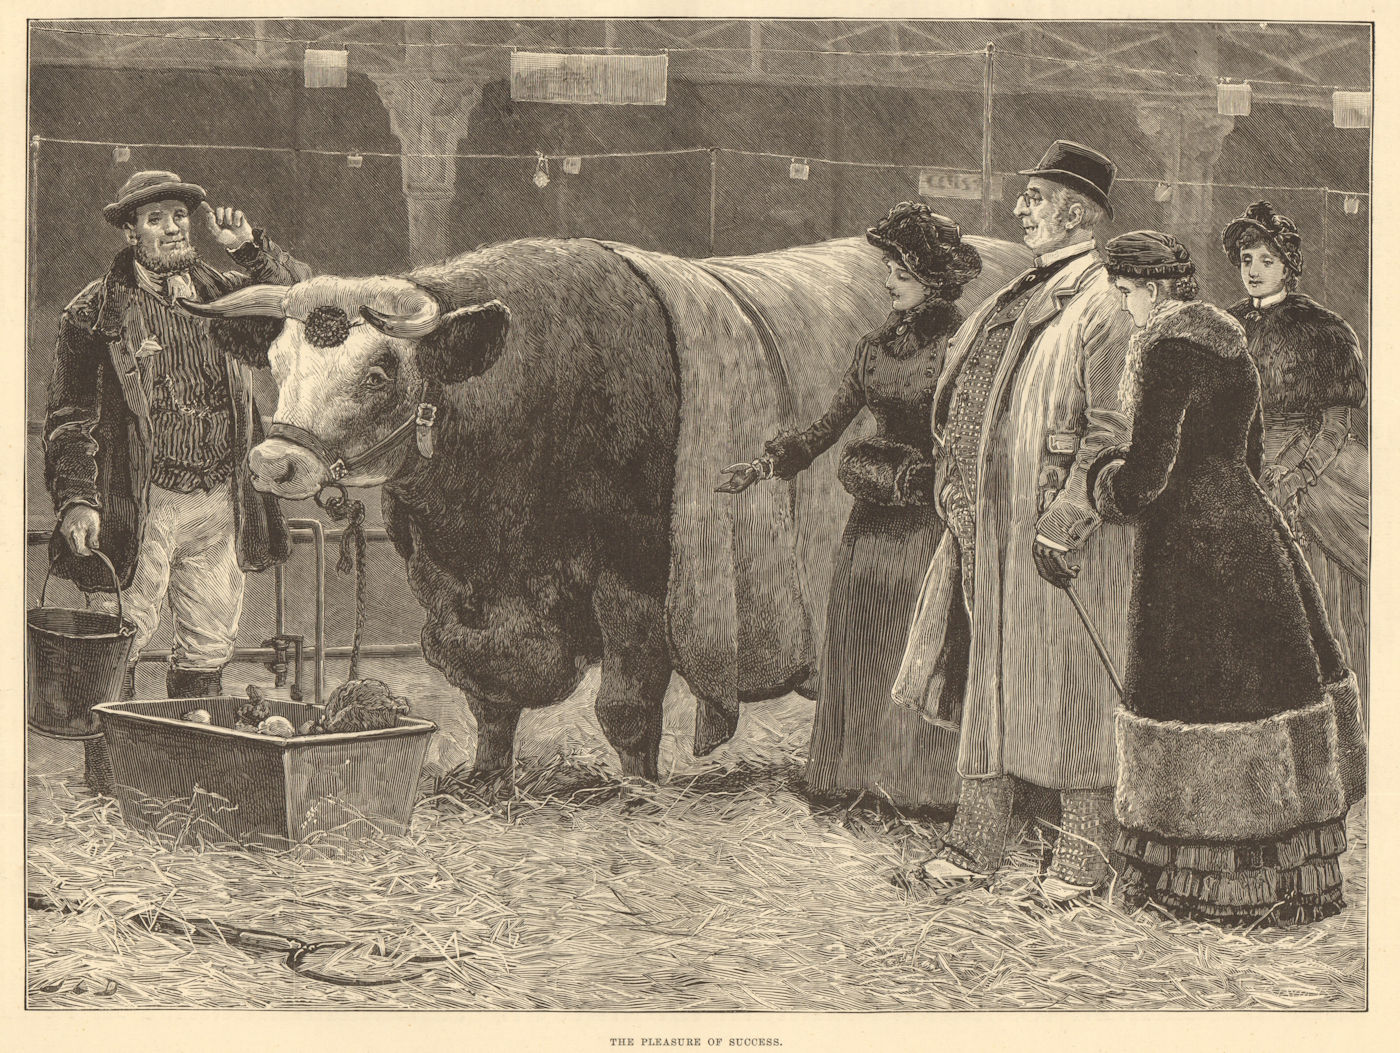 Associate Product The pleasure of success. Prize bull. Cows 1883 antique ILN full page print